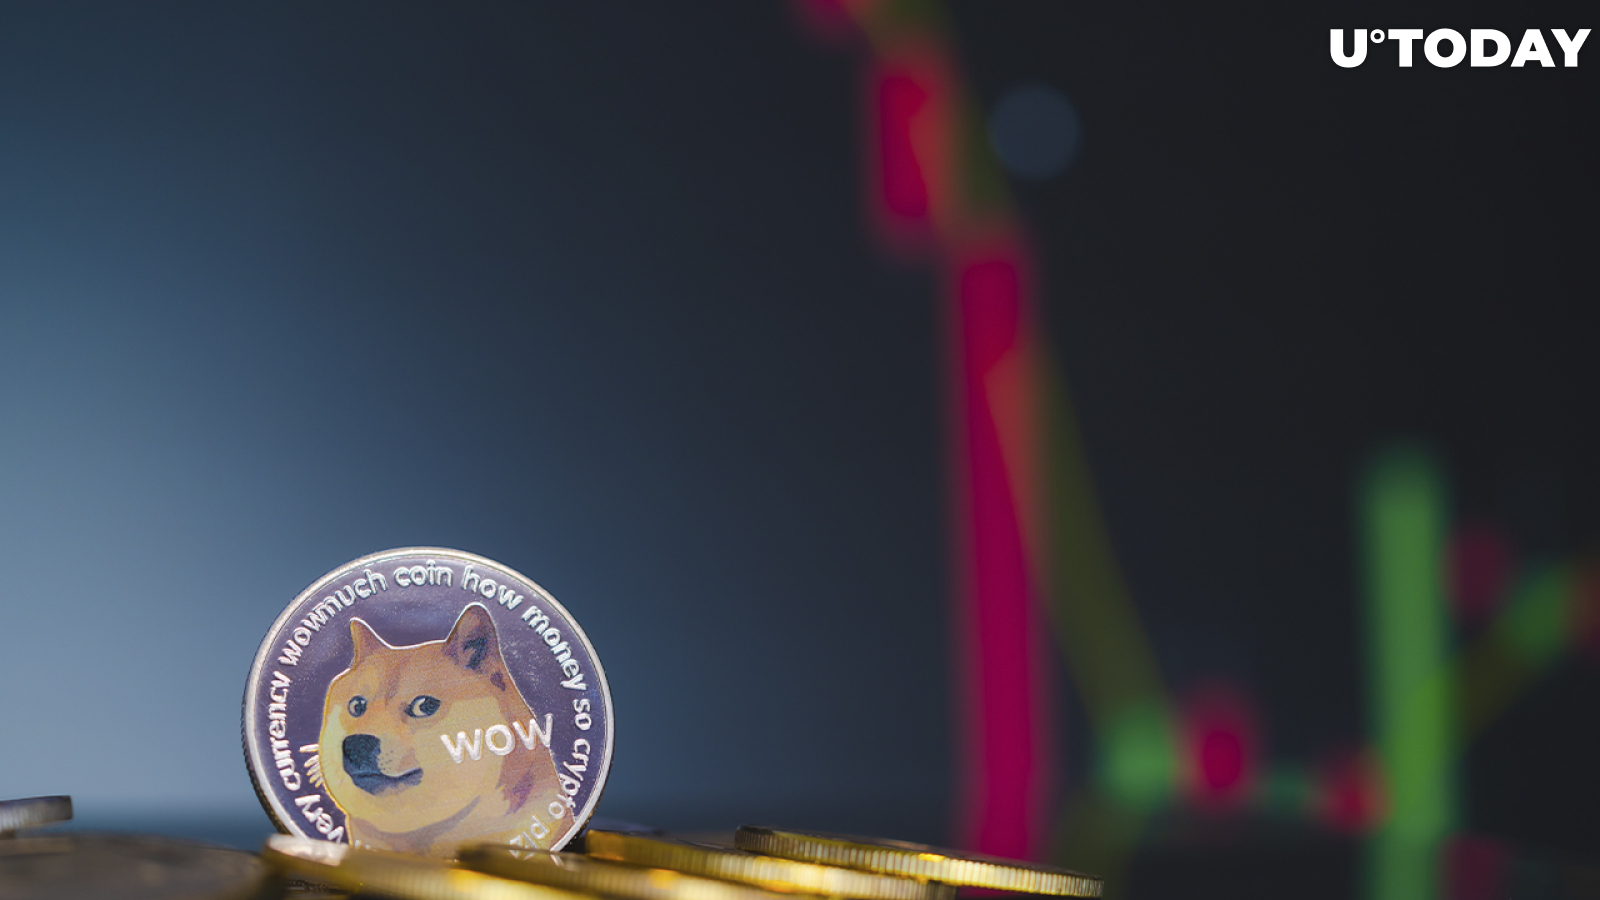 Dogecoin Cofounder Reveals His DOGE Holdings, Explains Why He'll Never Return to This Project